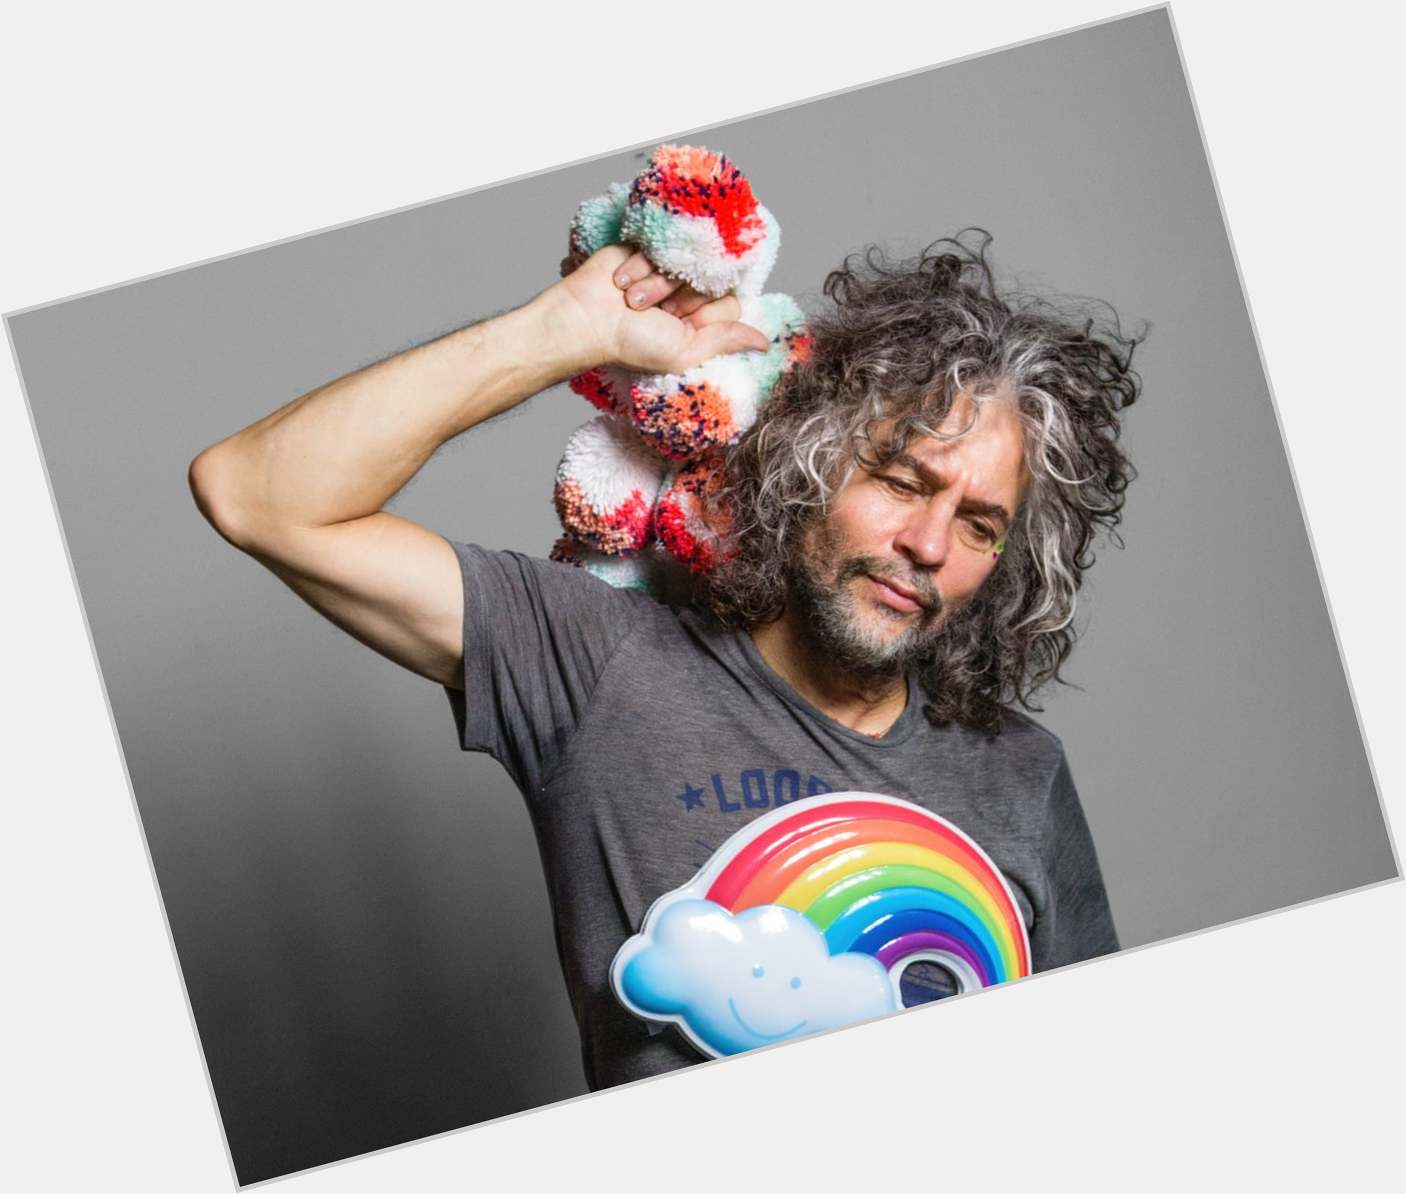 Please join me here at in wishing the one and only Wayne Coyne a very Happy 60th Birthday today  